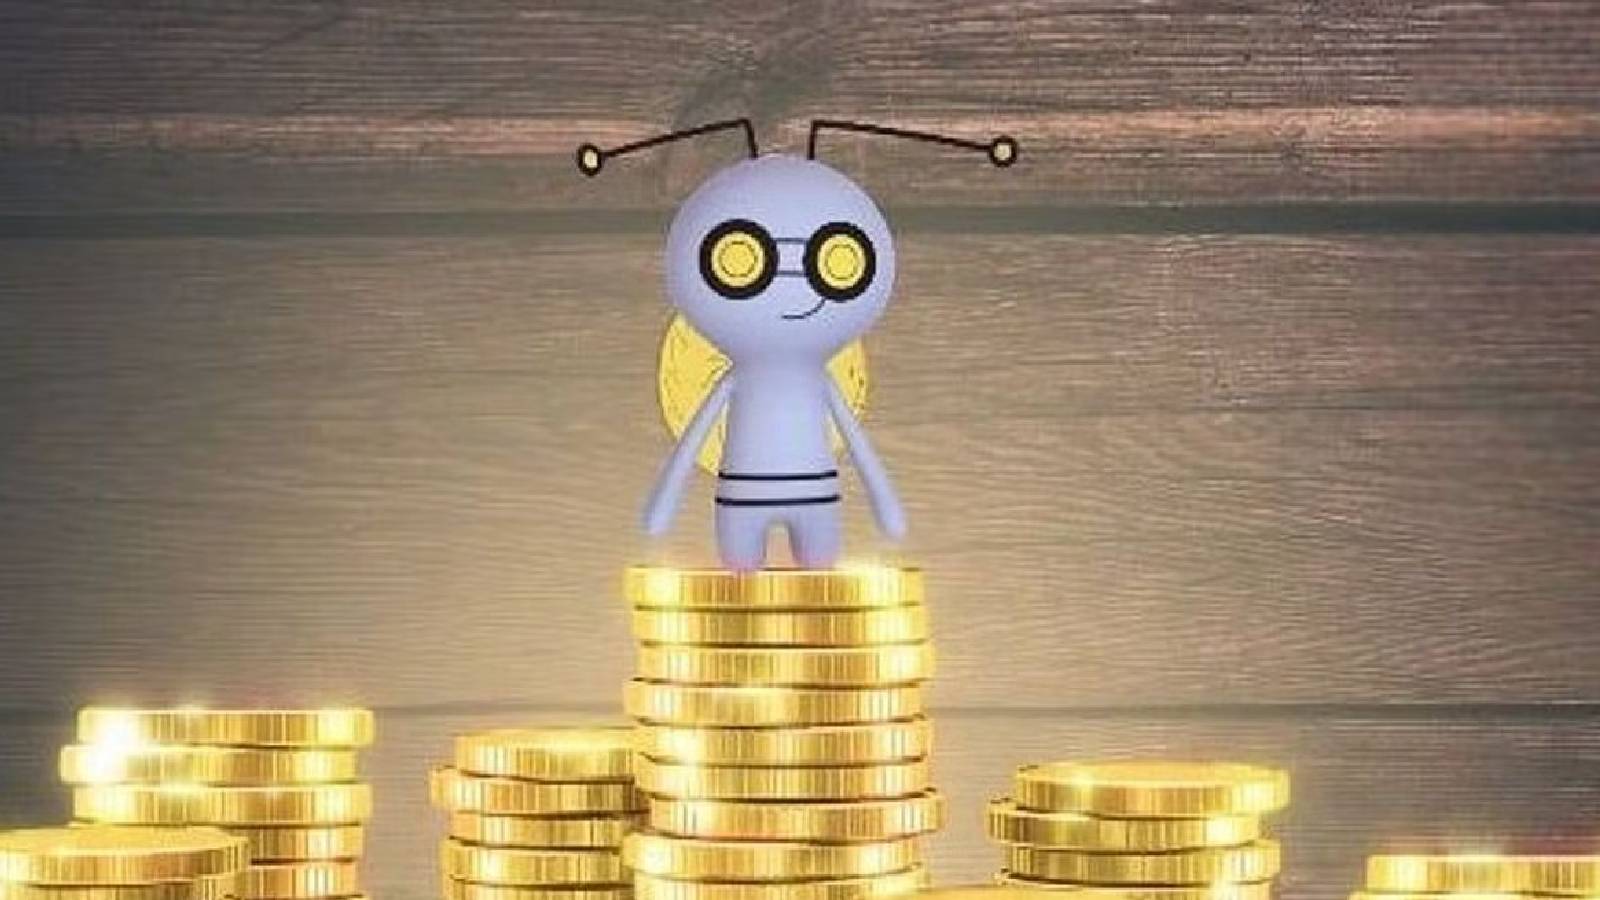 Pokemon Go key art shows Gimmighoul on top of a pile of coins